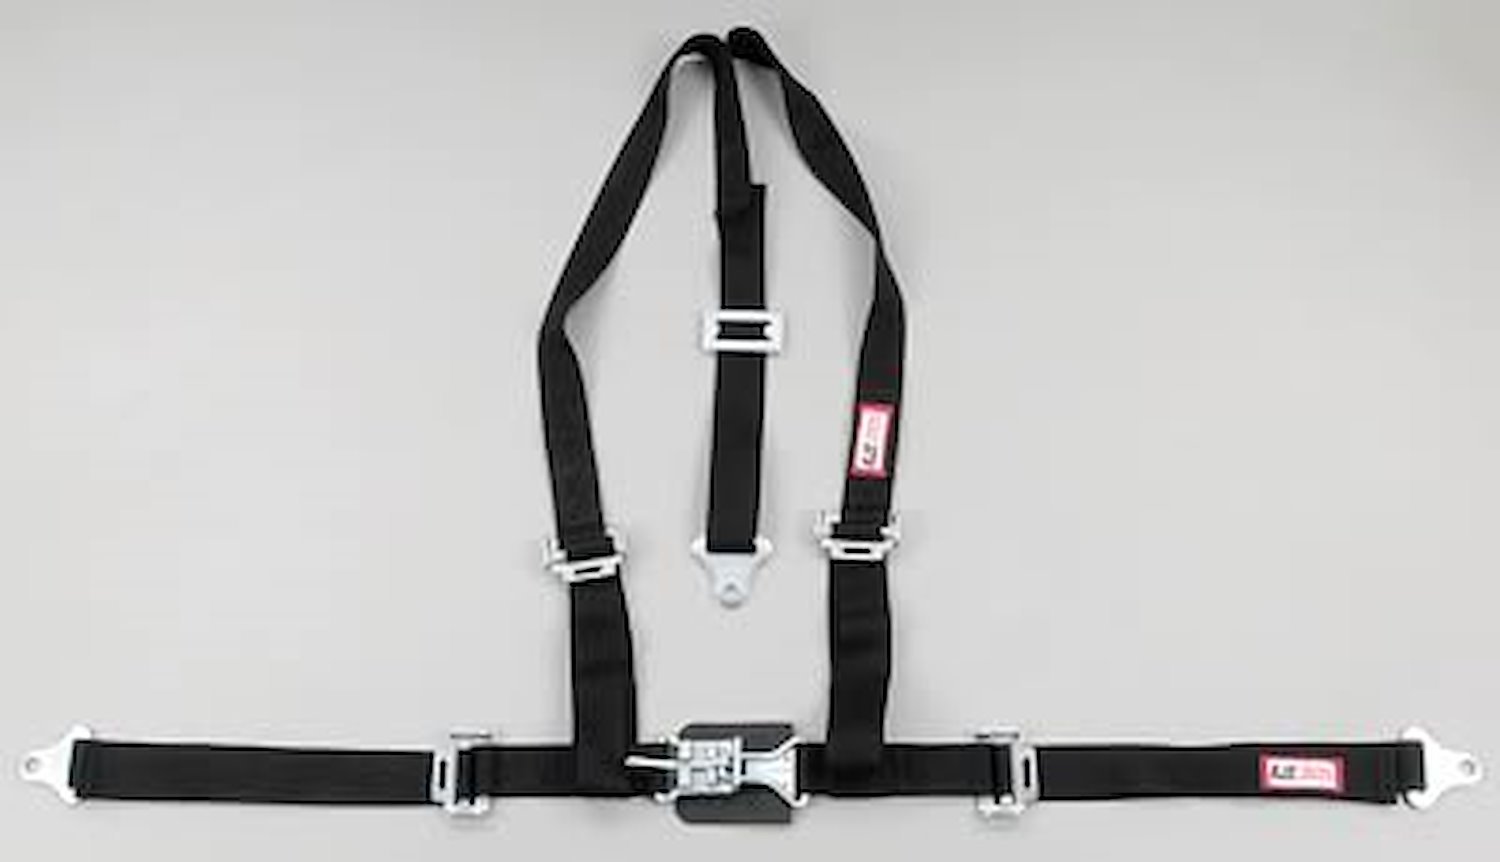 NON-SFI L&L HARNESS 2 PULL UP Lap Belt SNAP SEWN IN 2 S.H. Y FLOOR Mount w/STERNUM STRAP WRAP/SNAP YELLOW